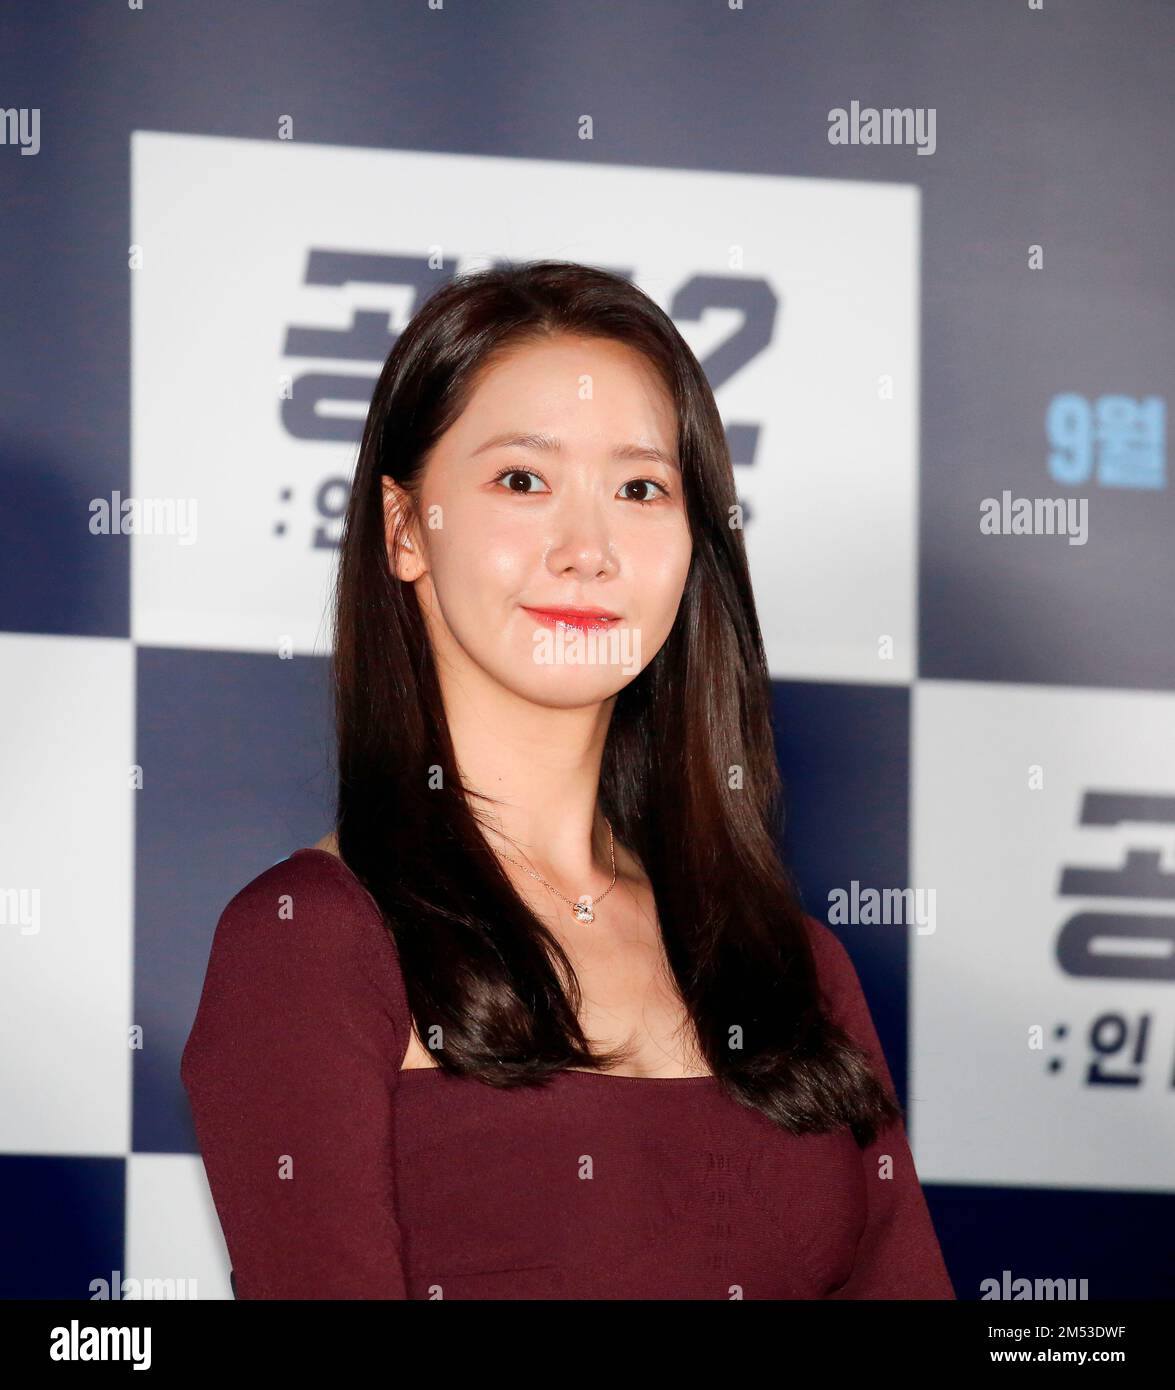 Yoon-A (Girls' Generation), Aug 30, 2022 : Actress Lim Yoona attends a press conference after a press preview of Korean film 'Confidential Assignment2 International' in Seoul, South Korea. Credit: Lee Jae-Won/AFLO/Alamy Live News Stock Photo